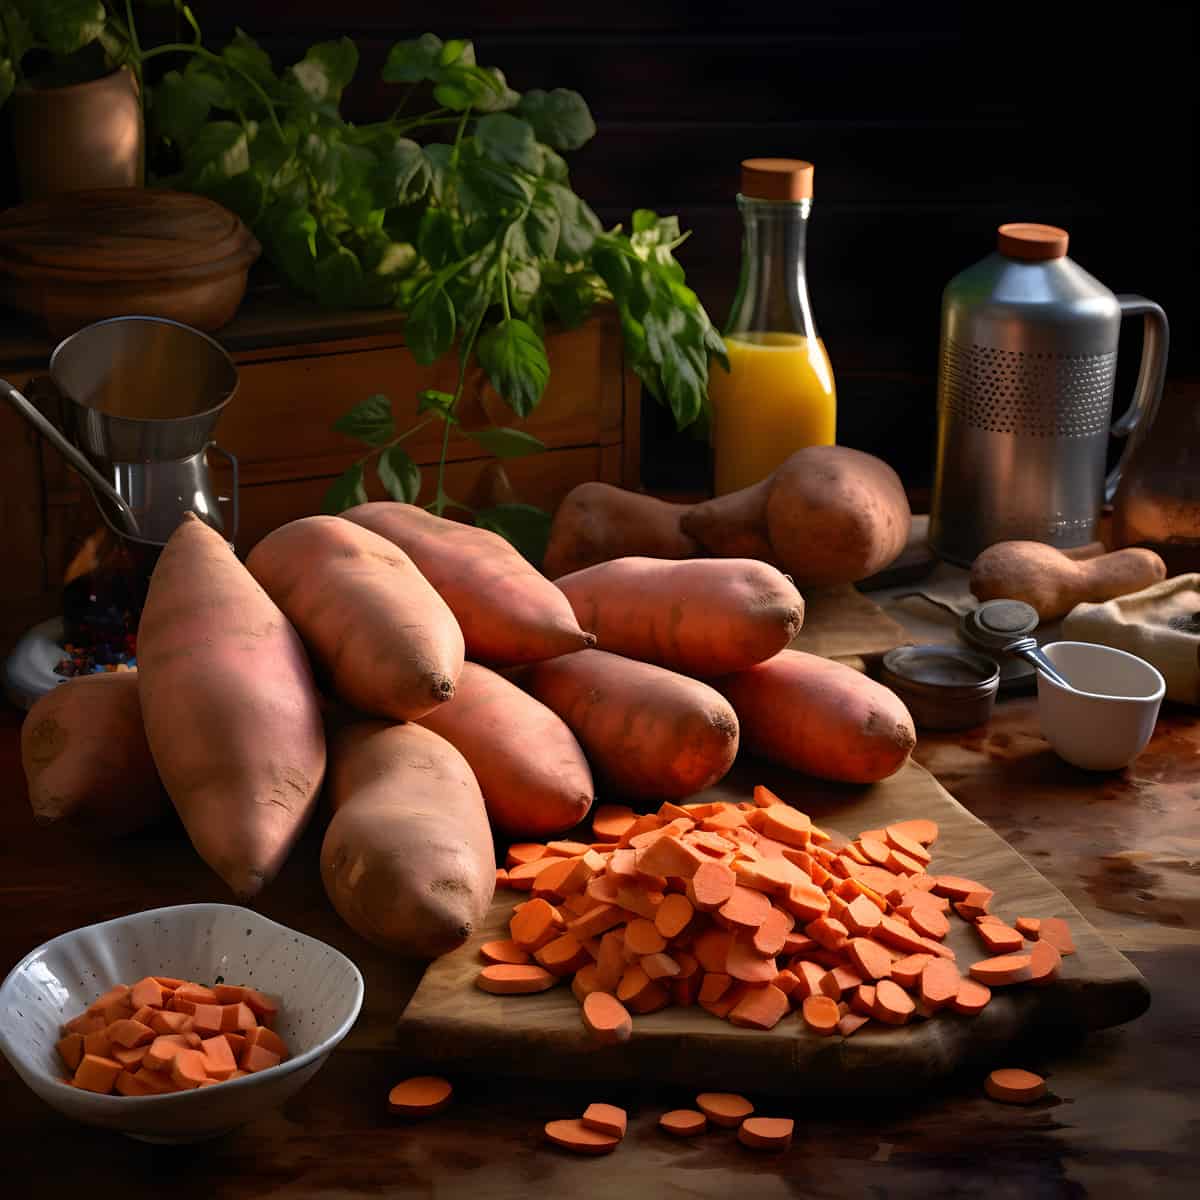 Redgold Or Okla Sweet Potatoes on a kitchen counter